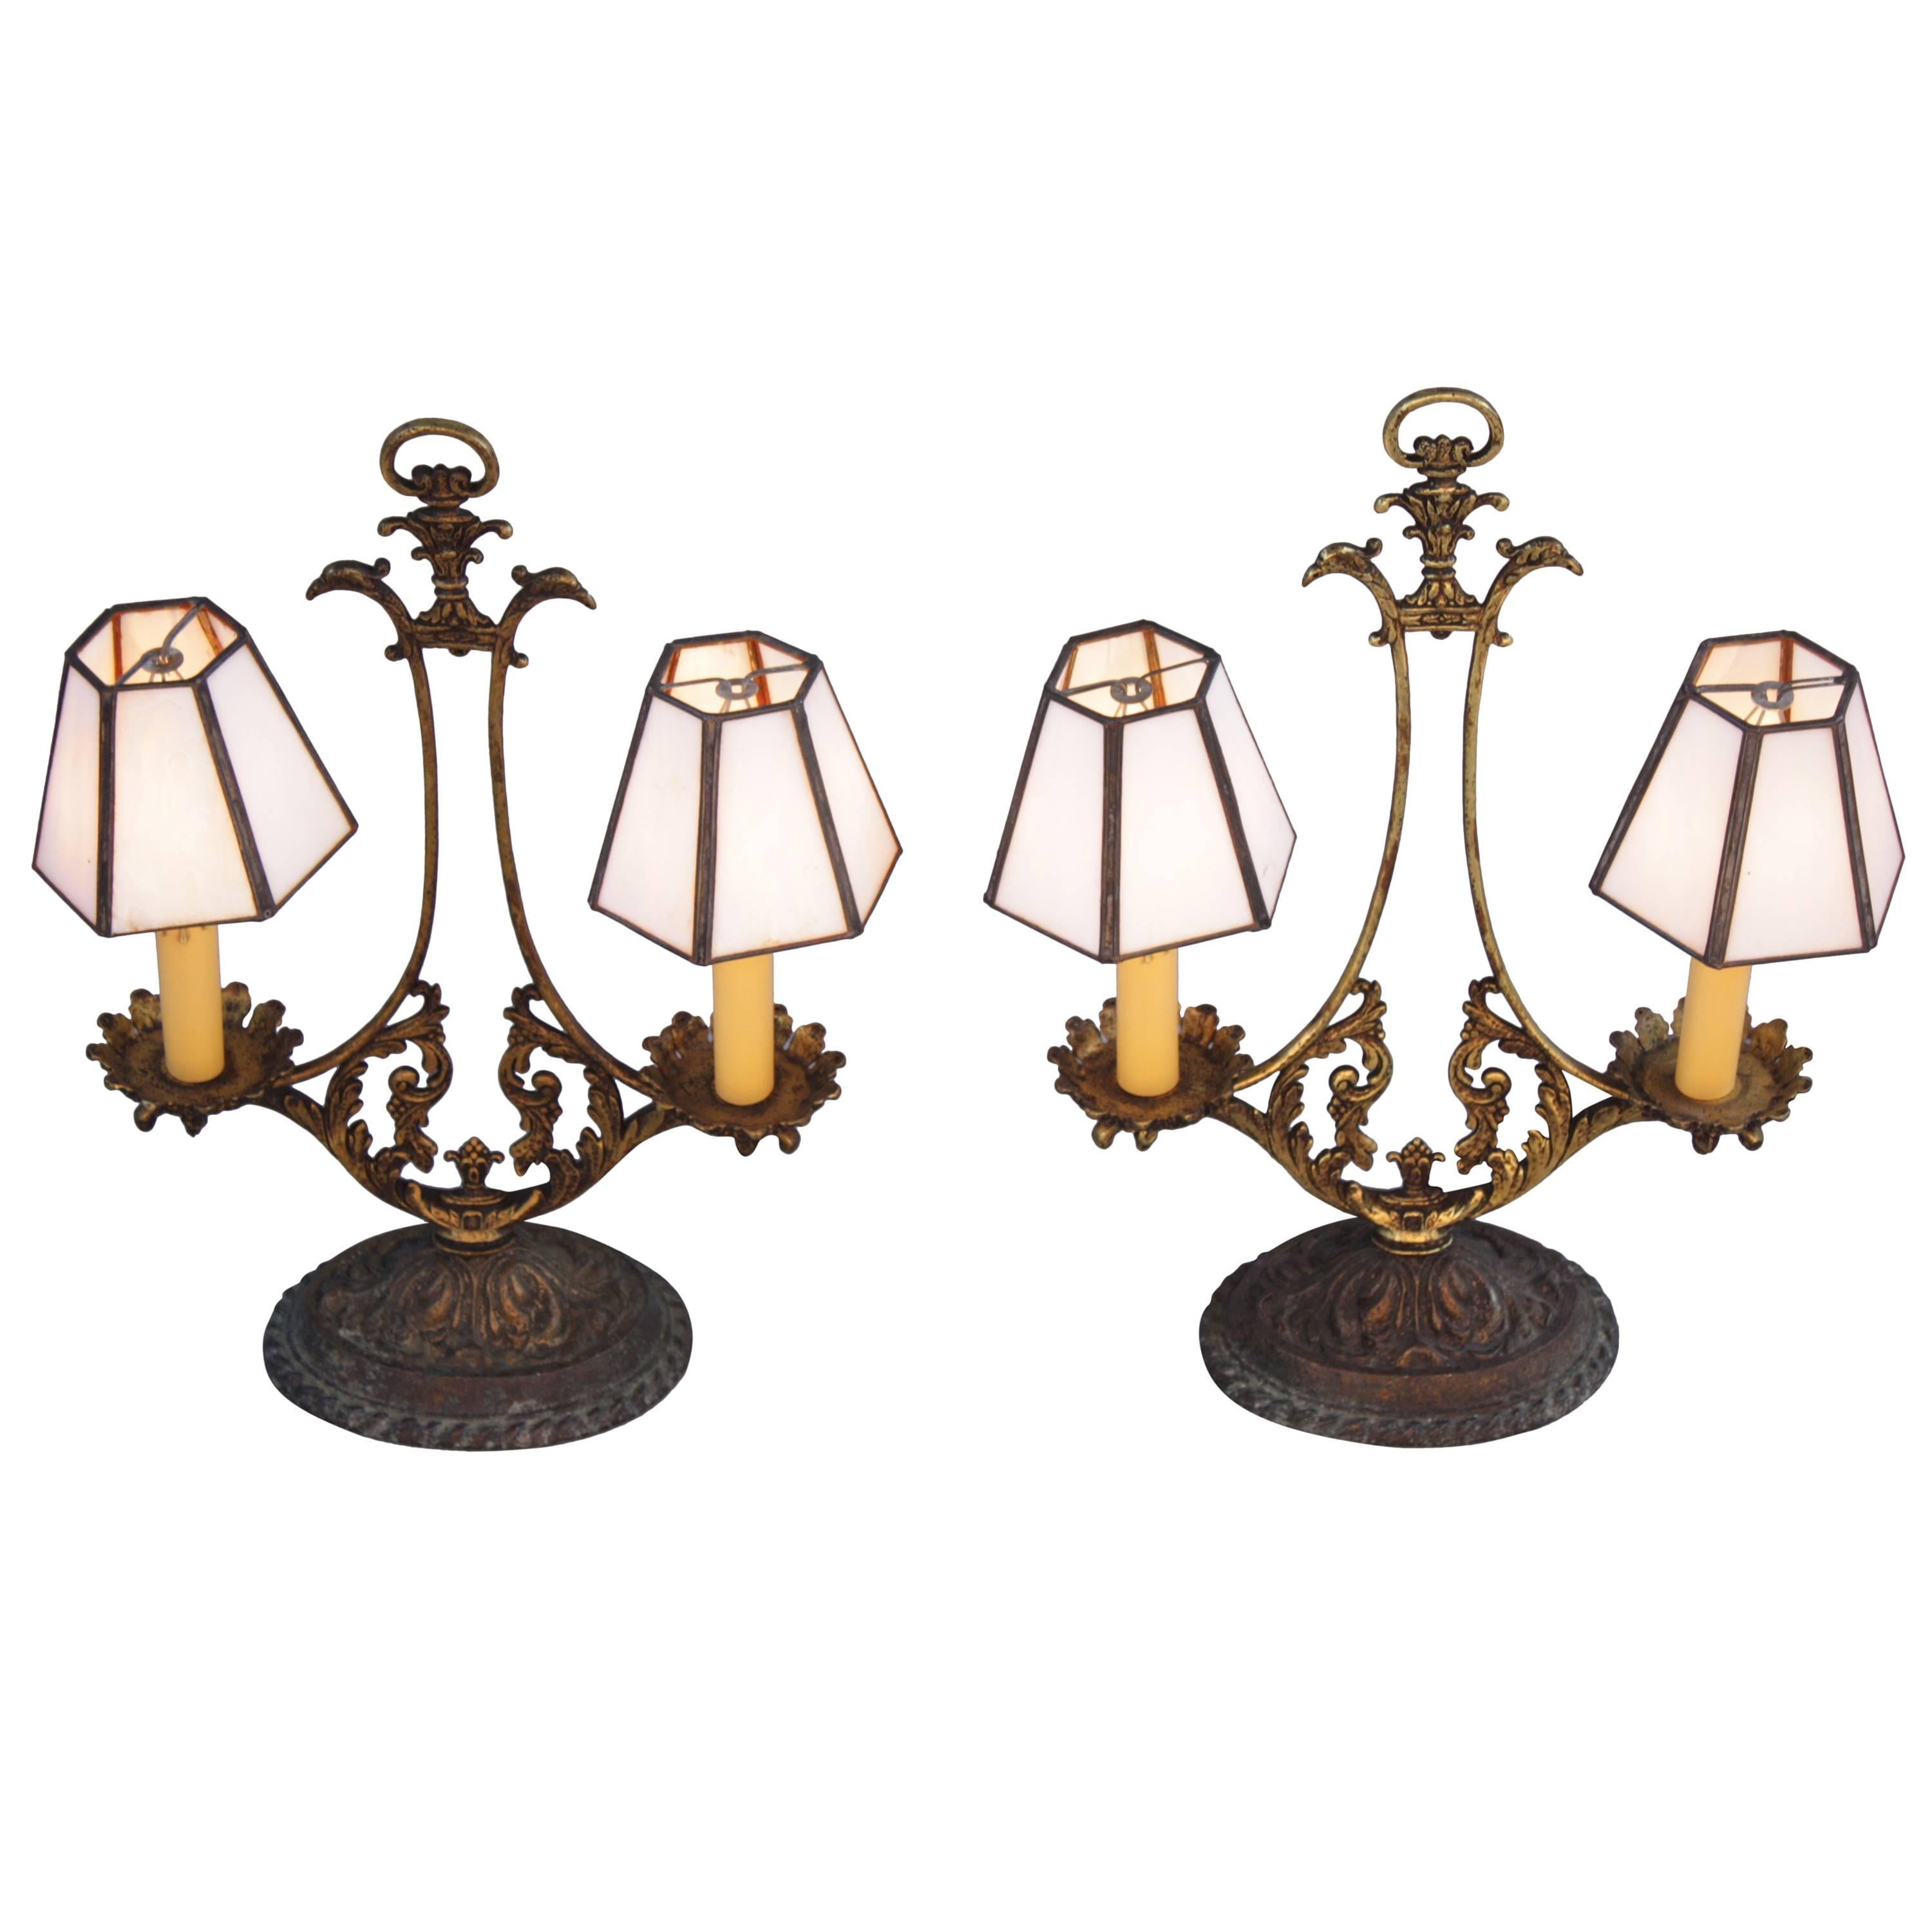 Pair of 1920s Spanish Revival Table Lamps For Sale